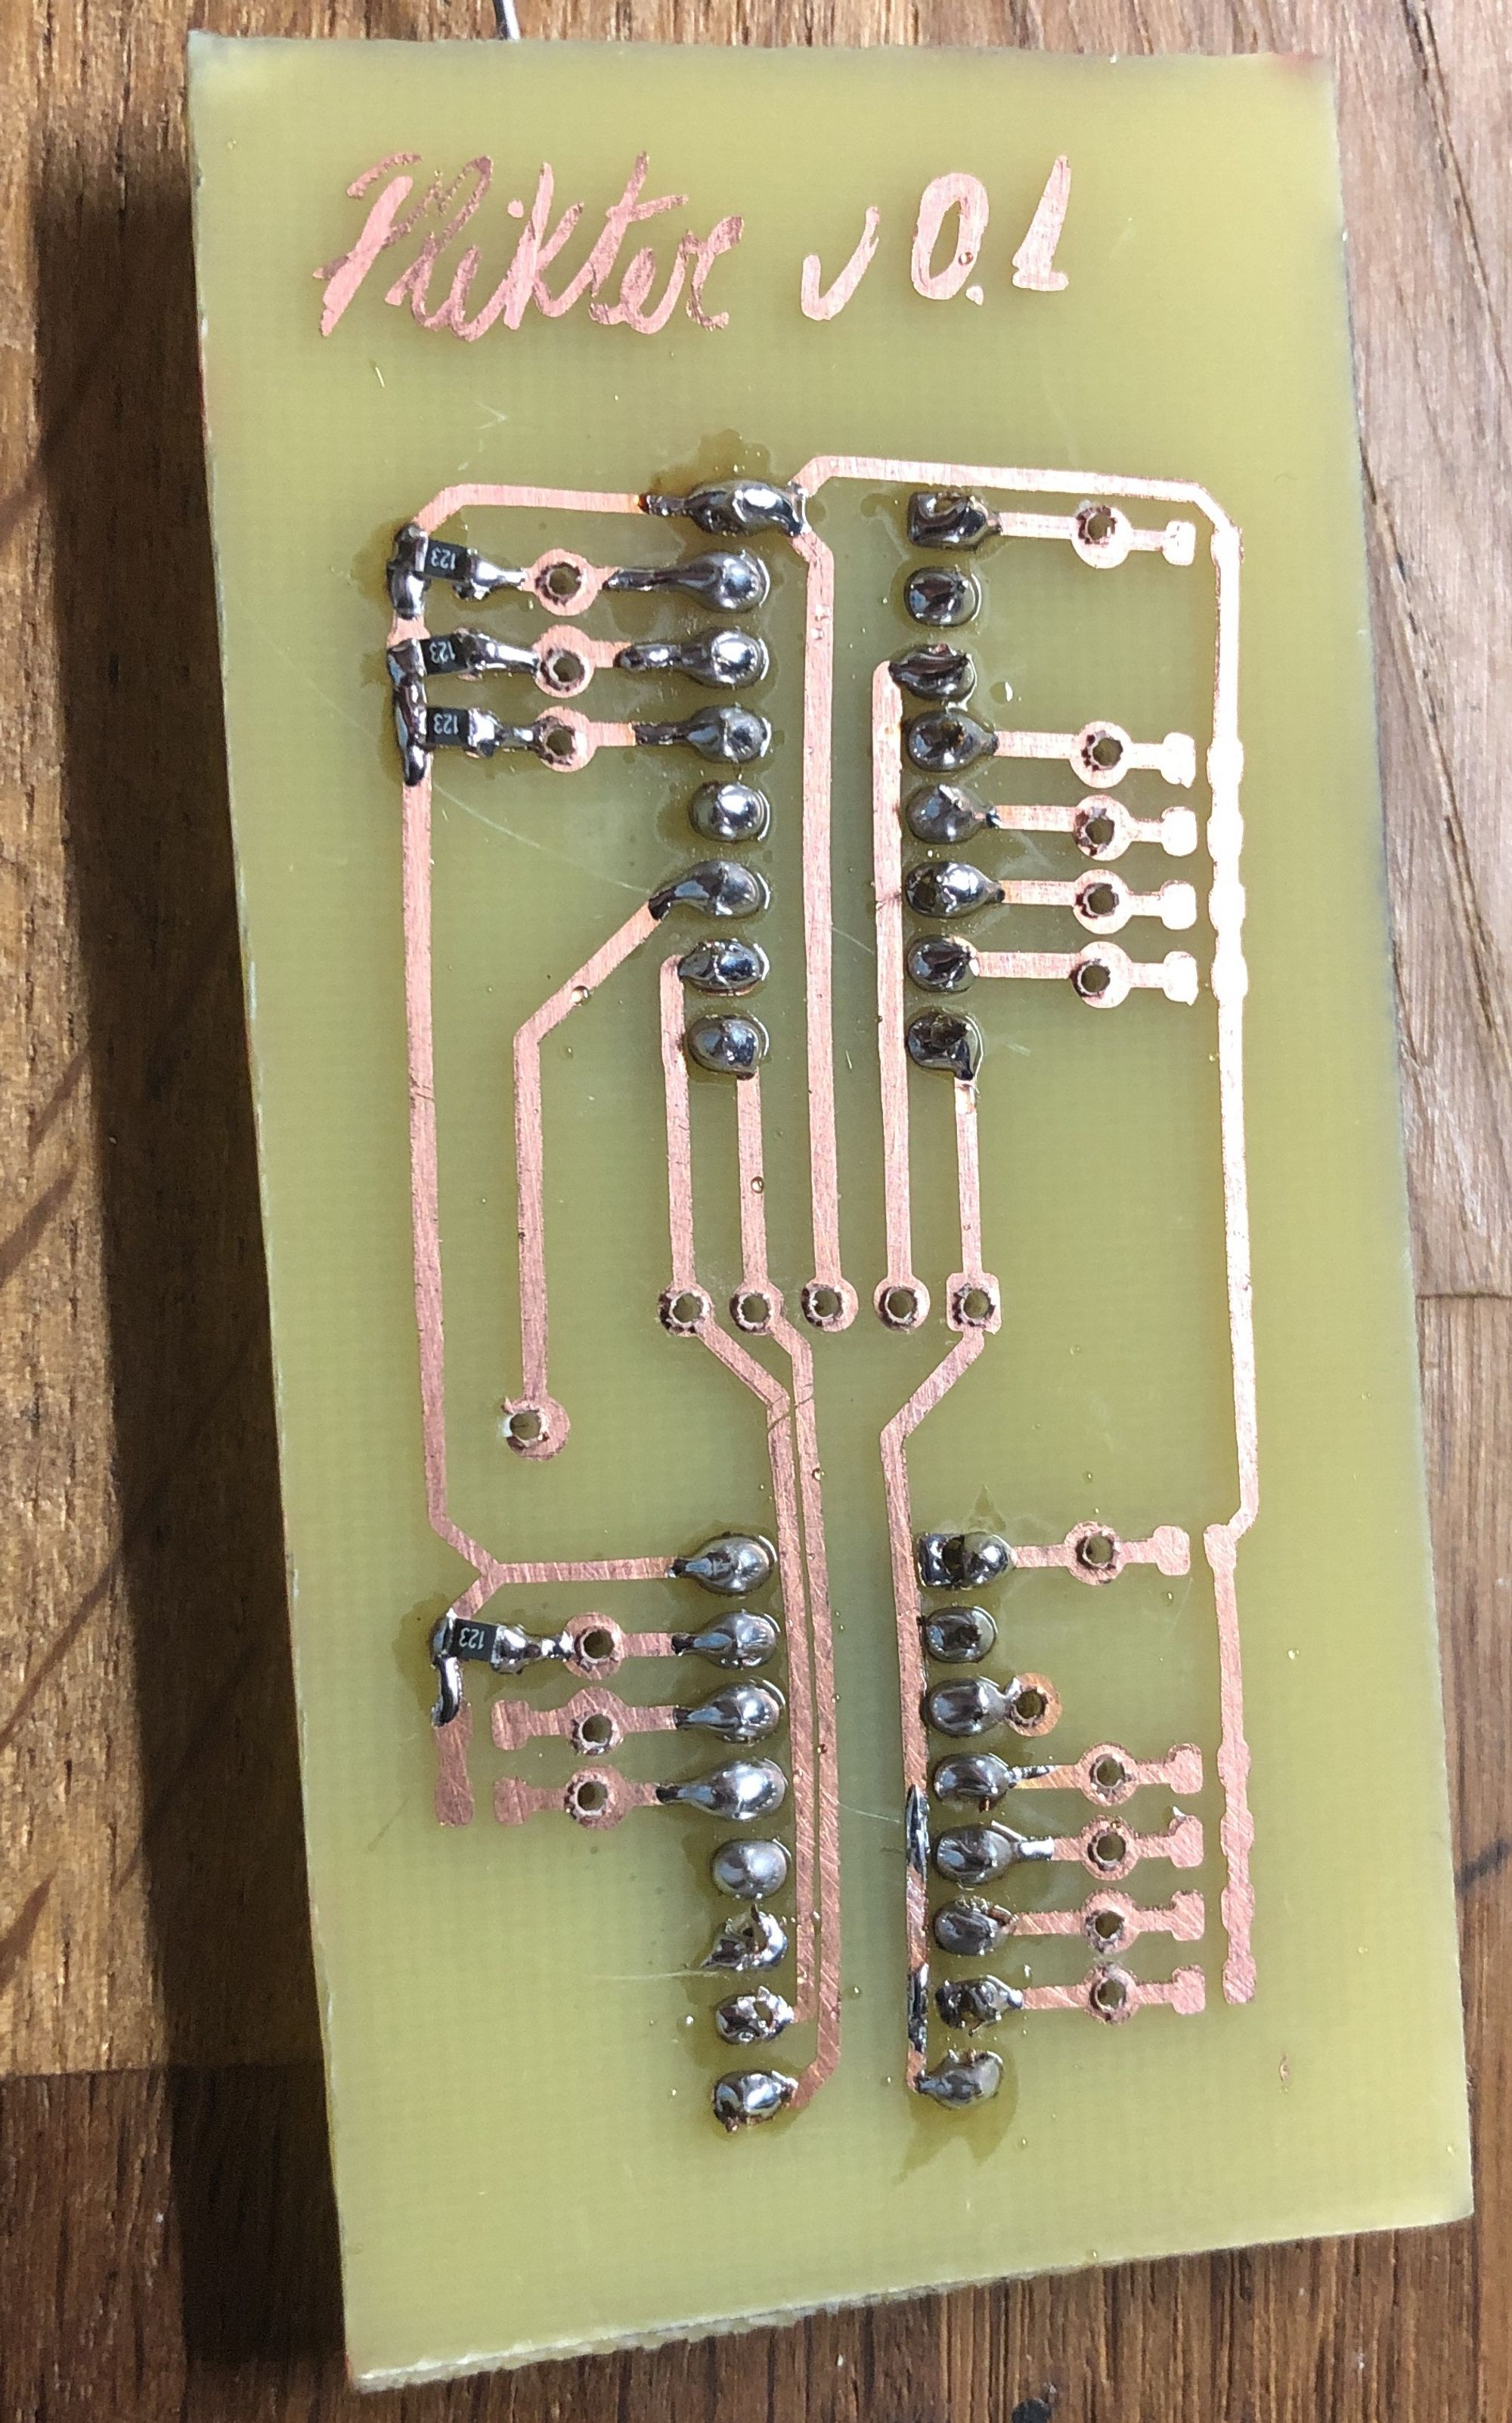 The Plikter board - just 2 shift registers daisy chained